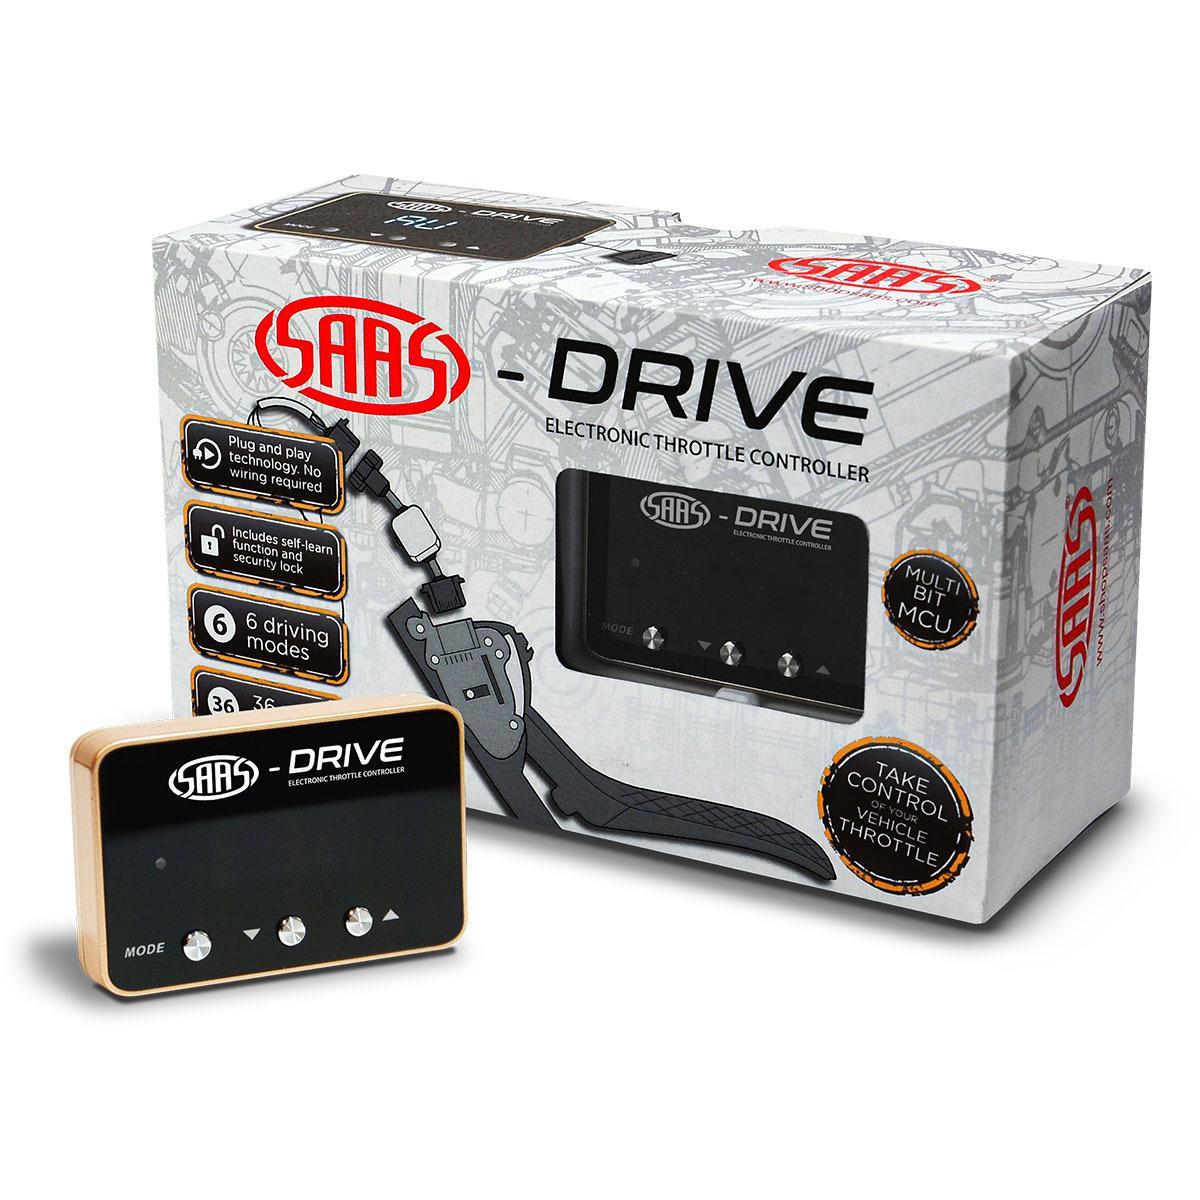 SAAS-Drive Throttle Controller For MG 3 2nd Gen 2011 >